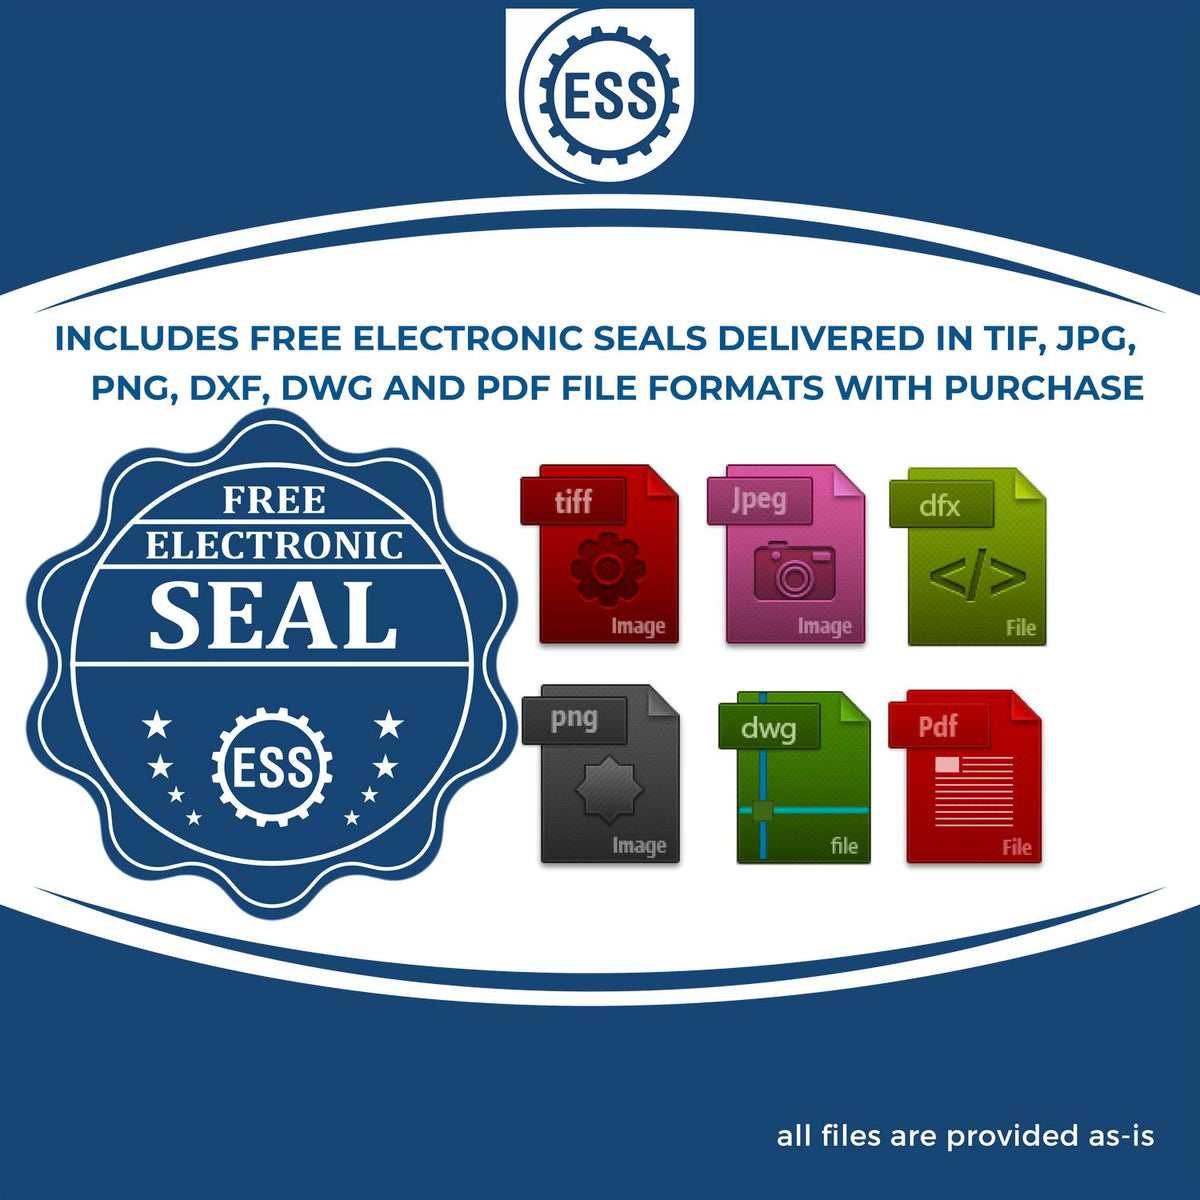 An infographic for the free electronic seal for the Illinois Engineer Desk Seal illustrating the different file type icons such as DXF, DWG, TIF, JPG and PNG.